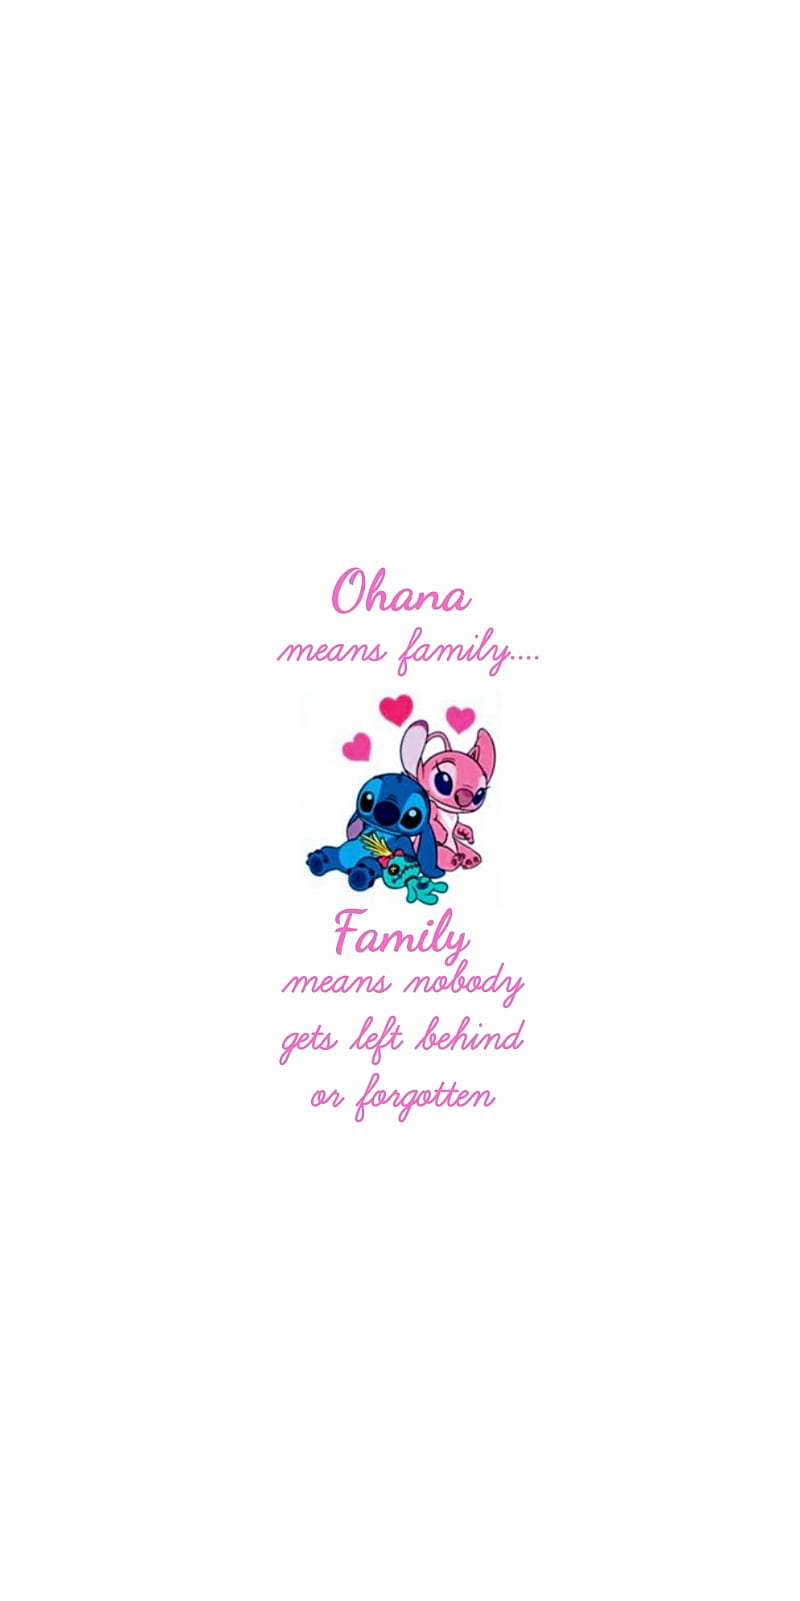 Ohana Means Family  Inspired by Lilo and Stitch  Chalkboard Background  Poster Print Photo Quality Disney Inspired  Home Art Print Frame not  Included 8x10 Ohana Chalkboard  Amazonin Home  Kitchen